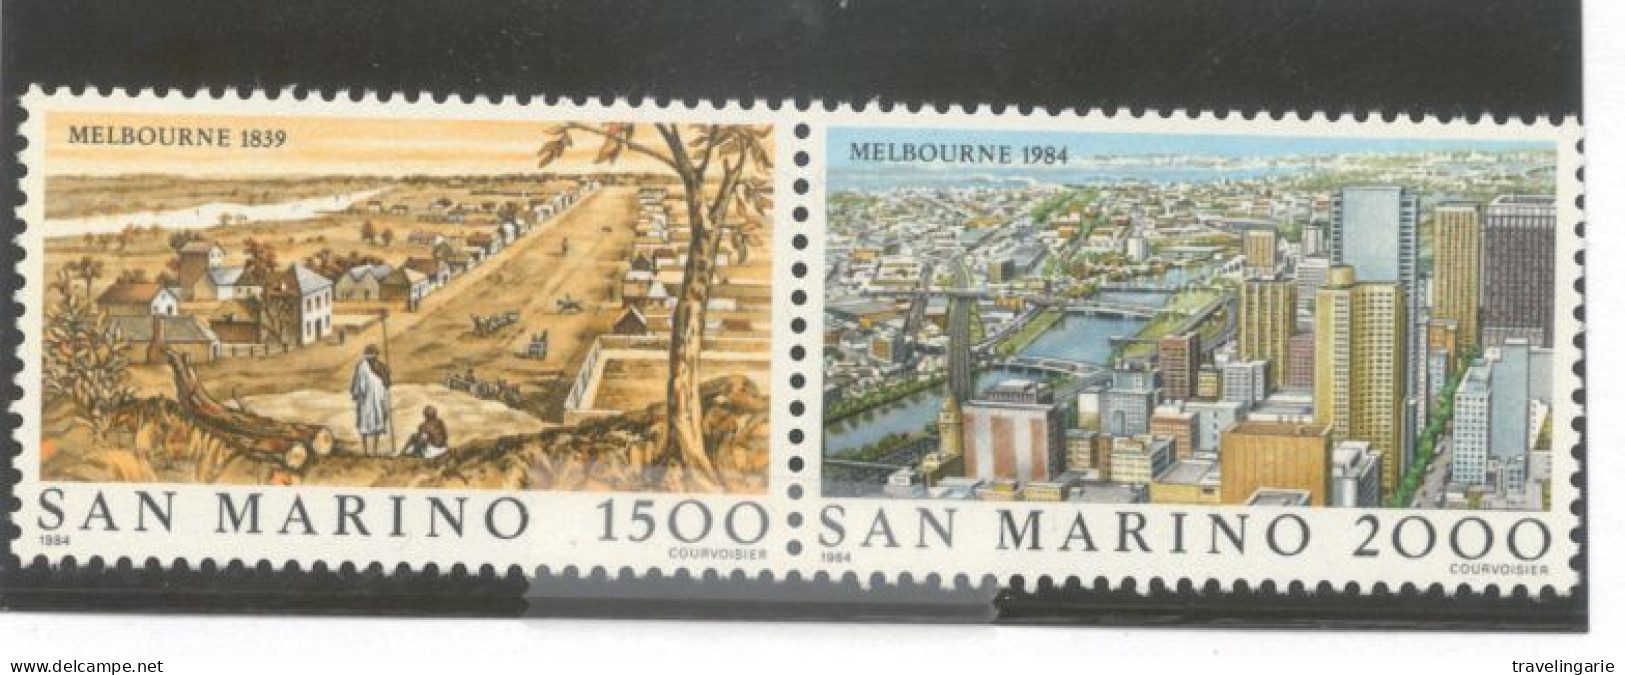 San Marino 1984 Famous Cities Melbourne MNH ** Se-tenant Pair - Unused Stamps